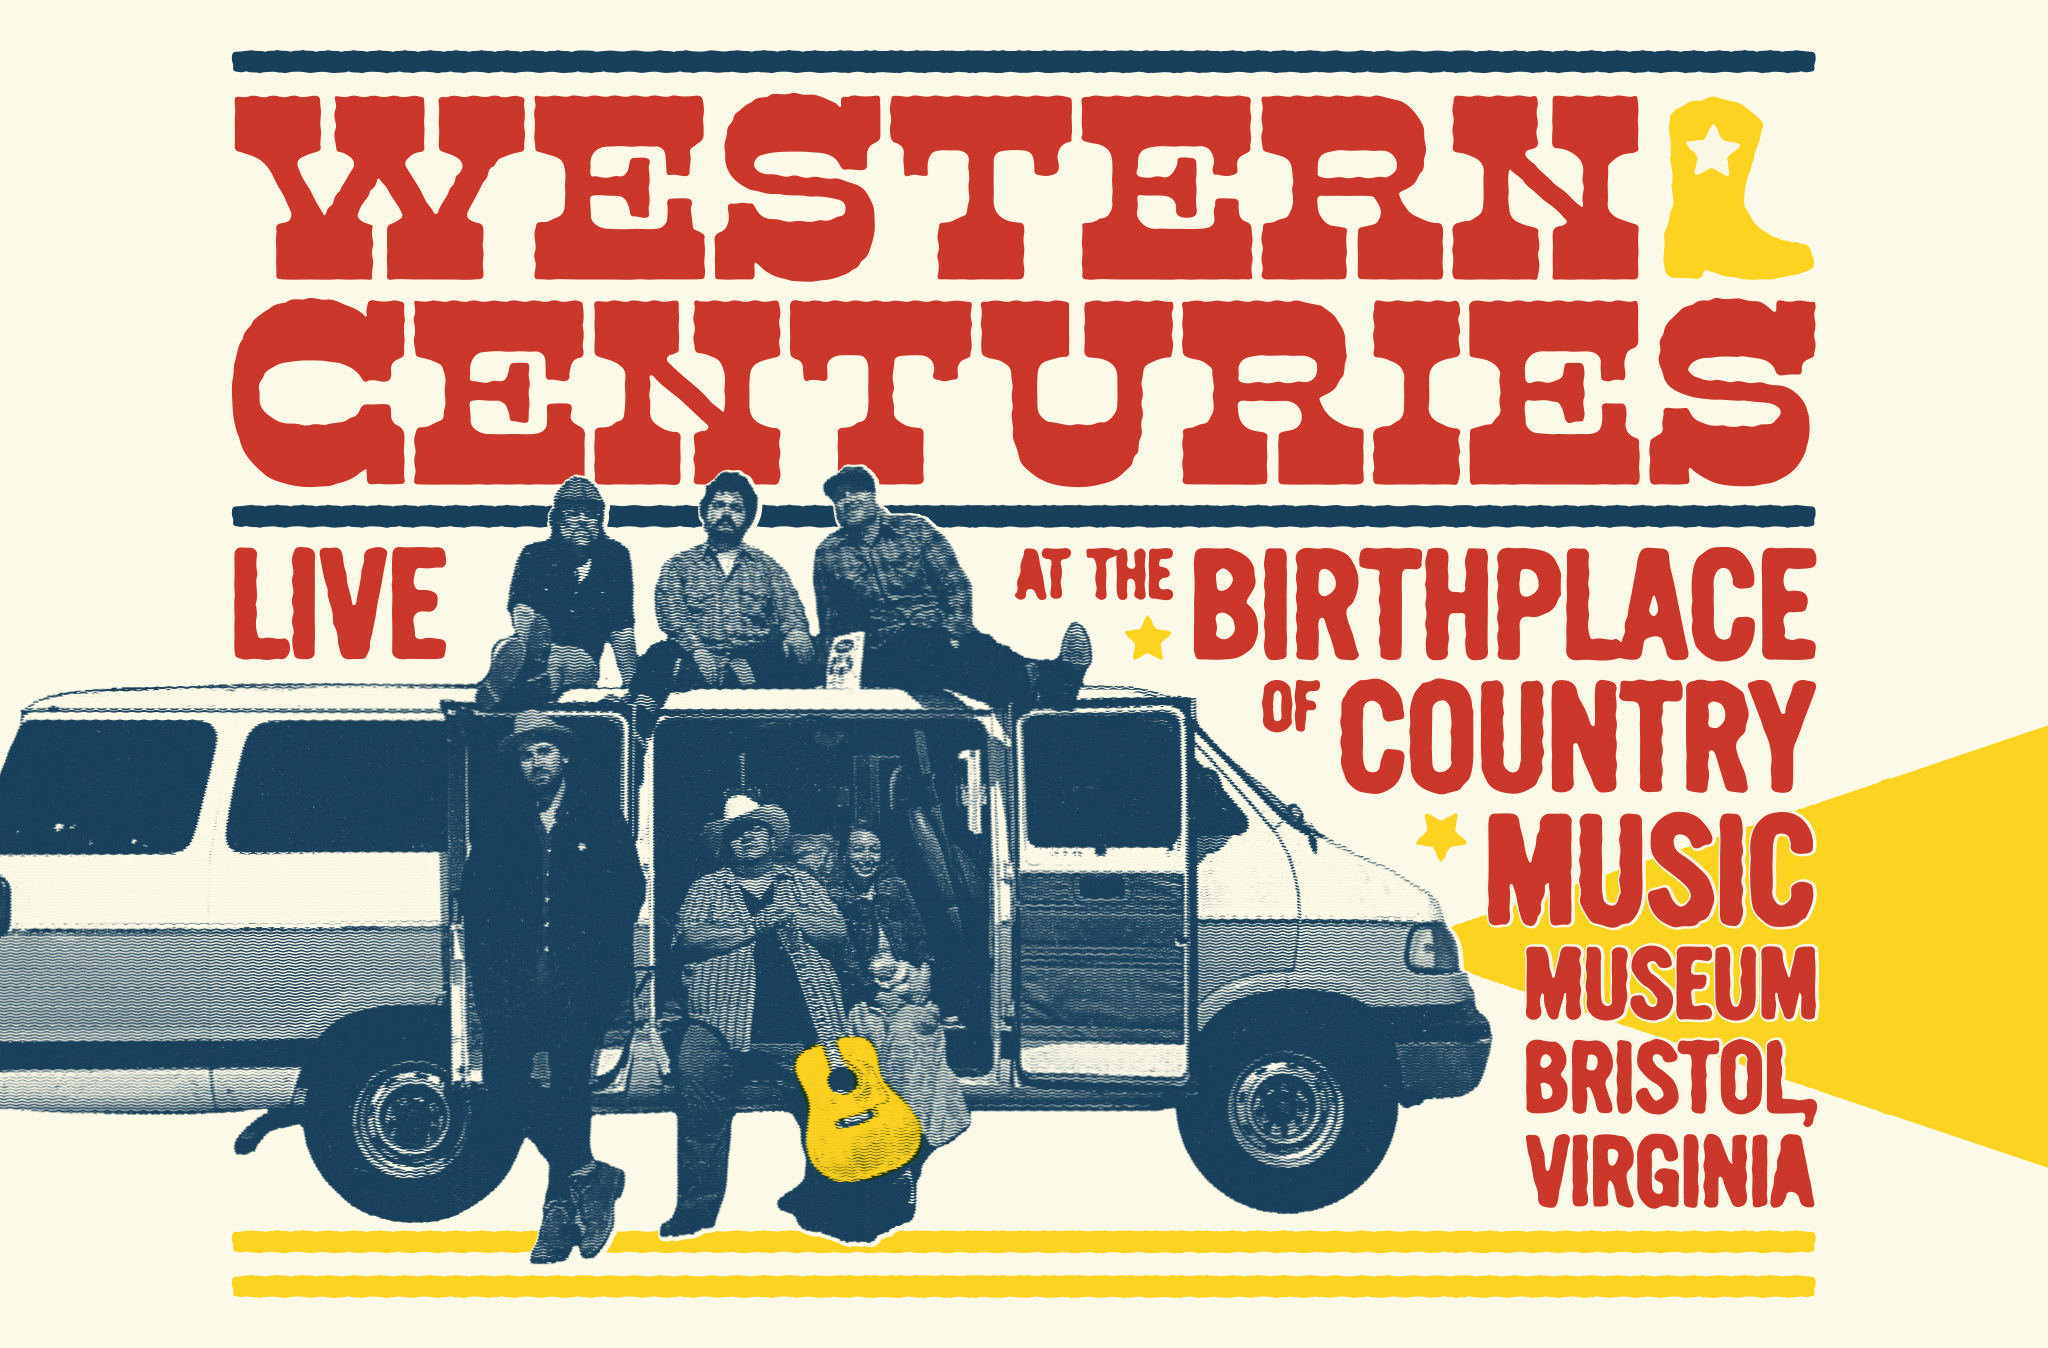 Show print style graphic with photo of the band Western Centuries